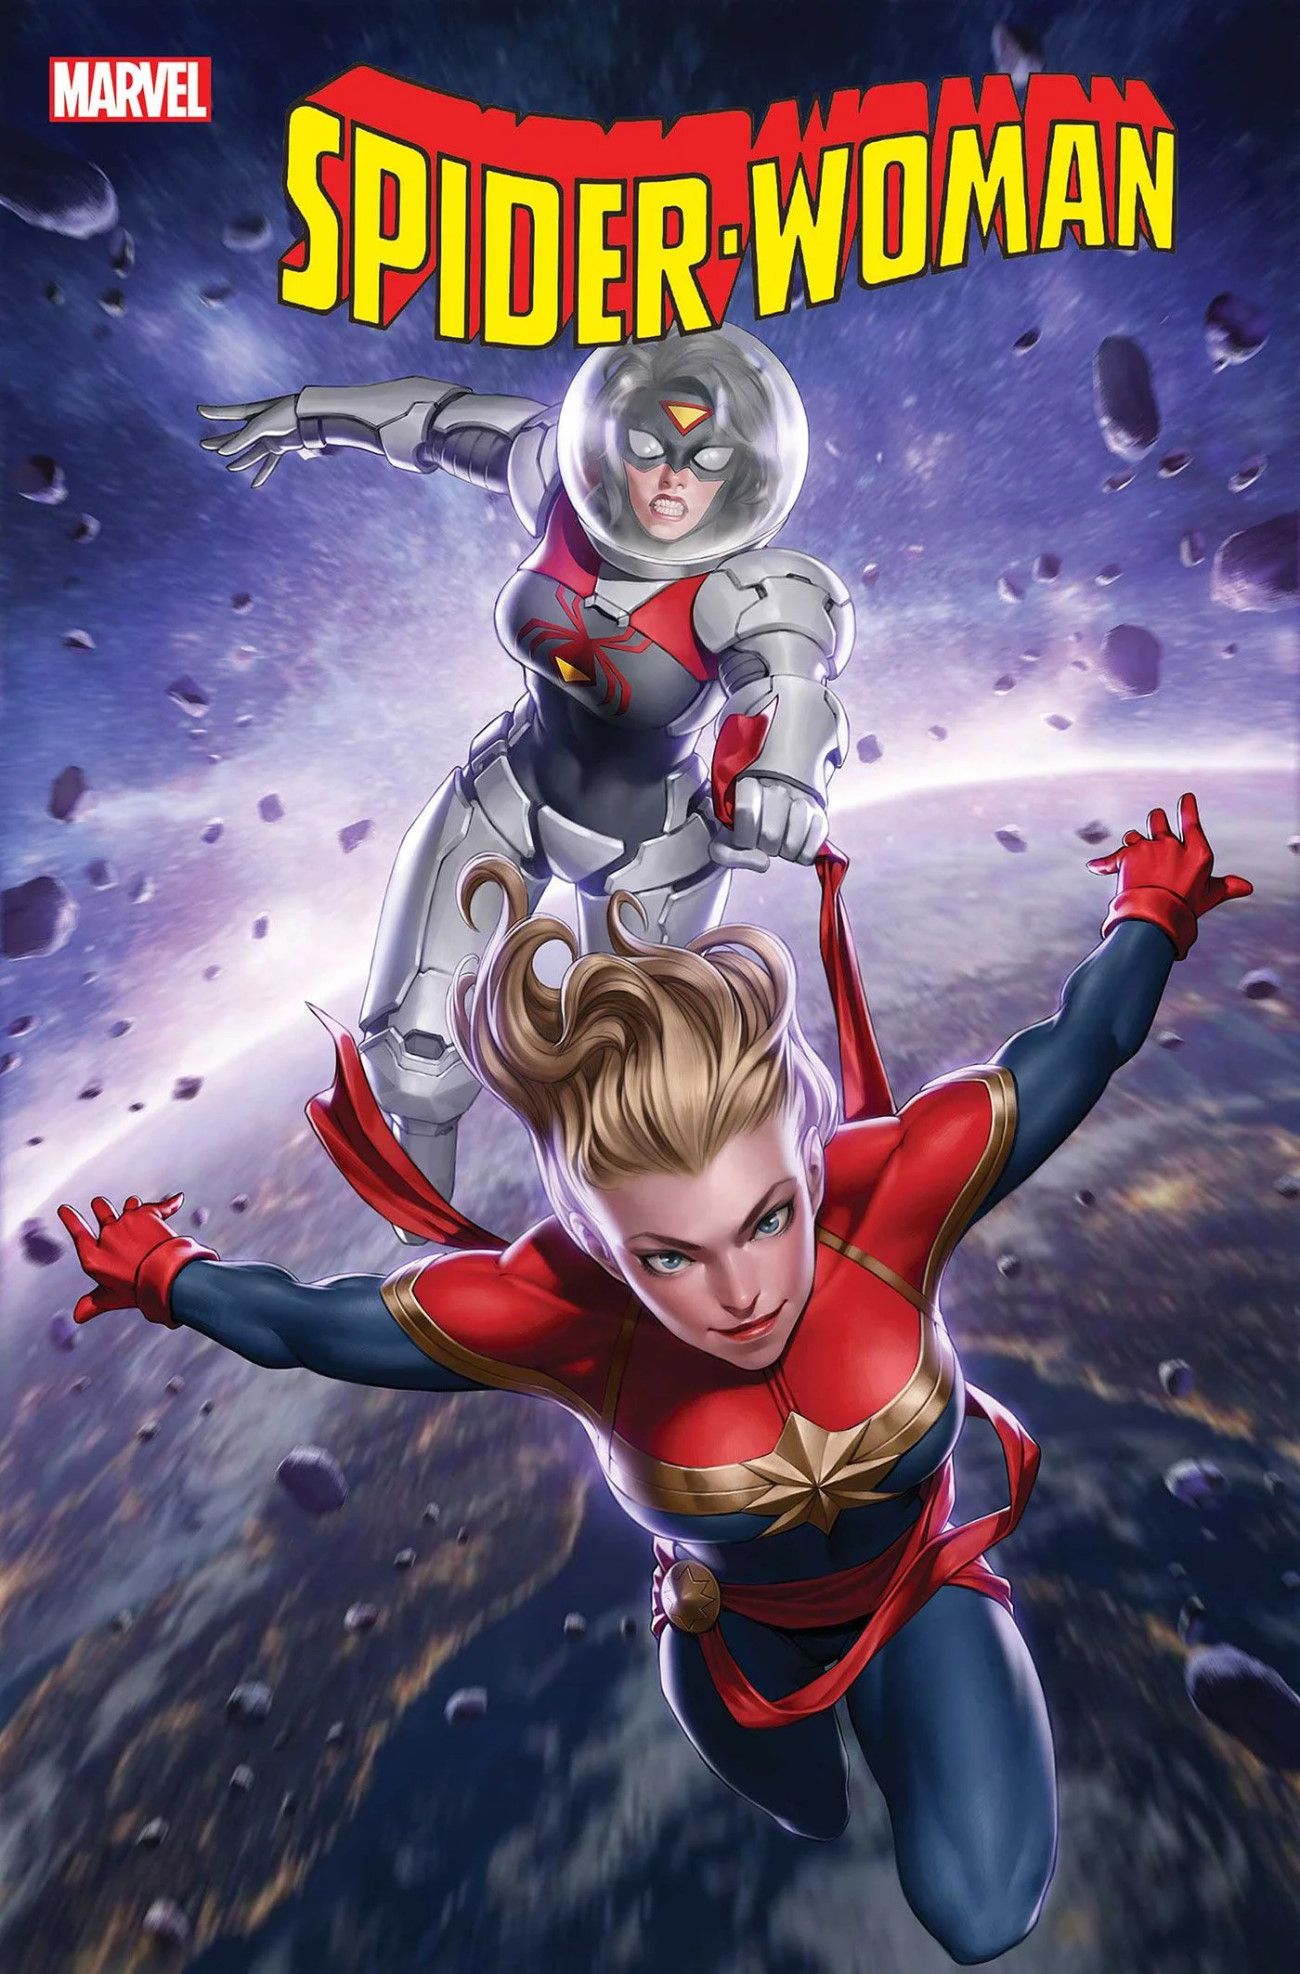 Spider-Woman is Heading To Space With Captain Marvel